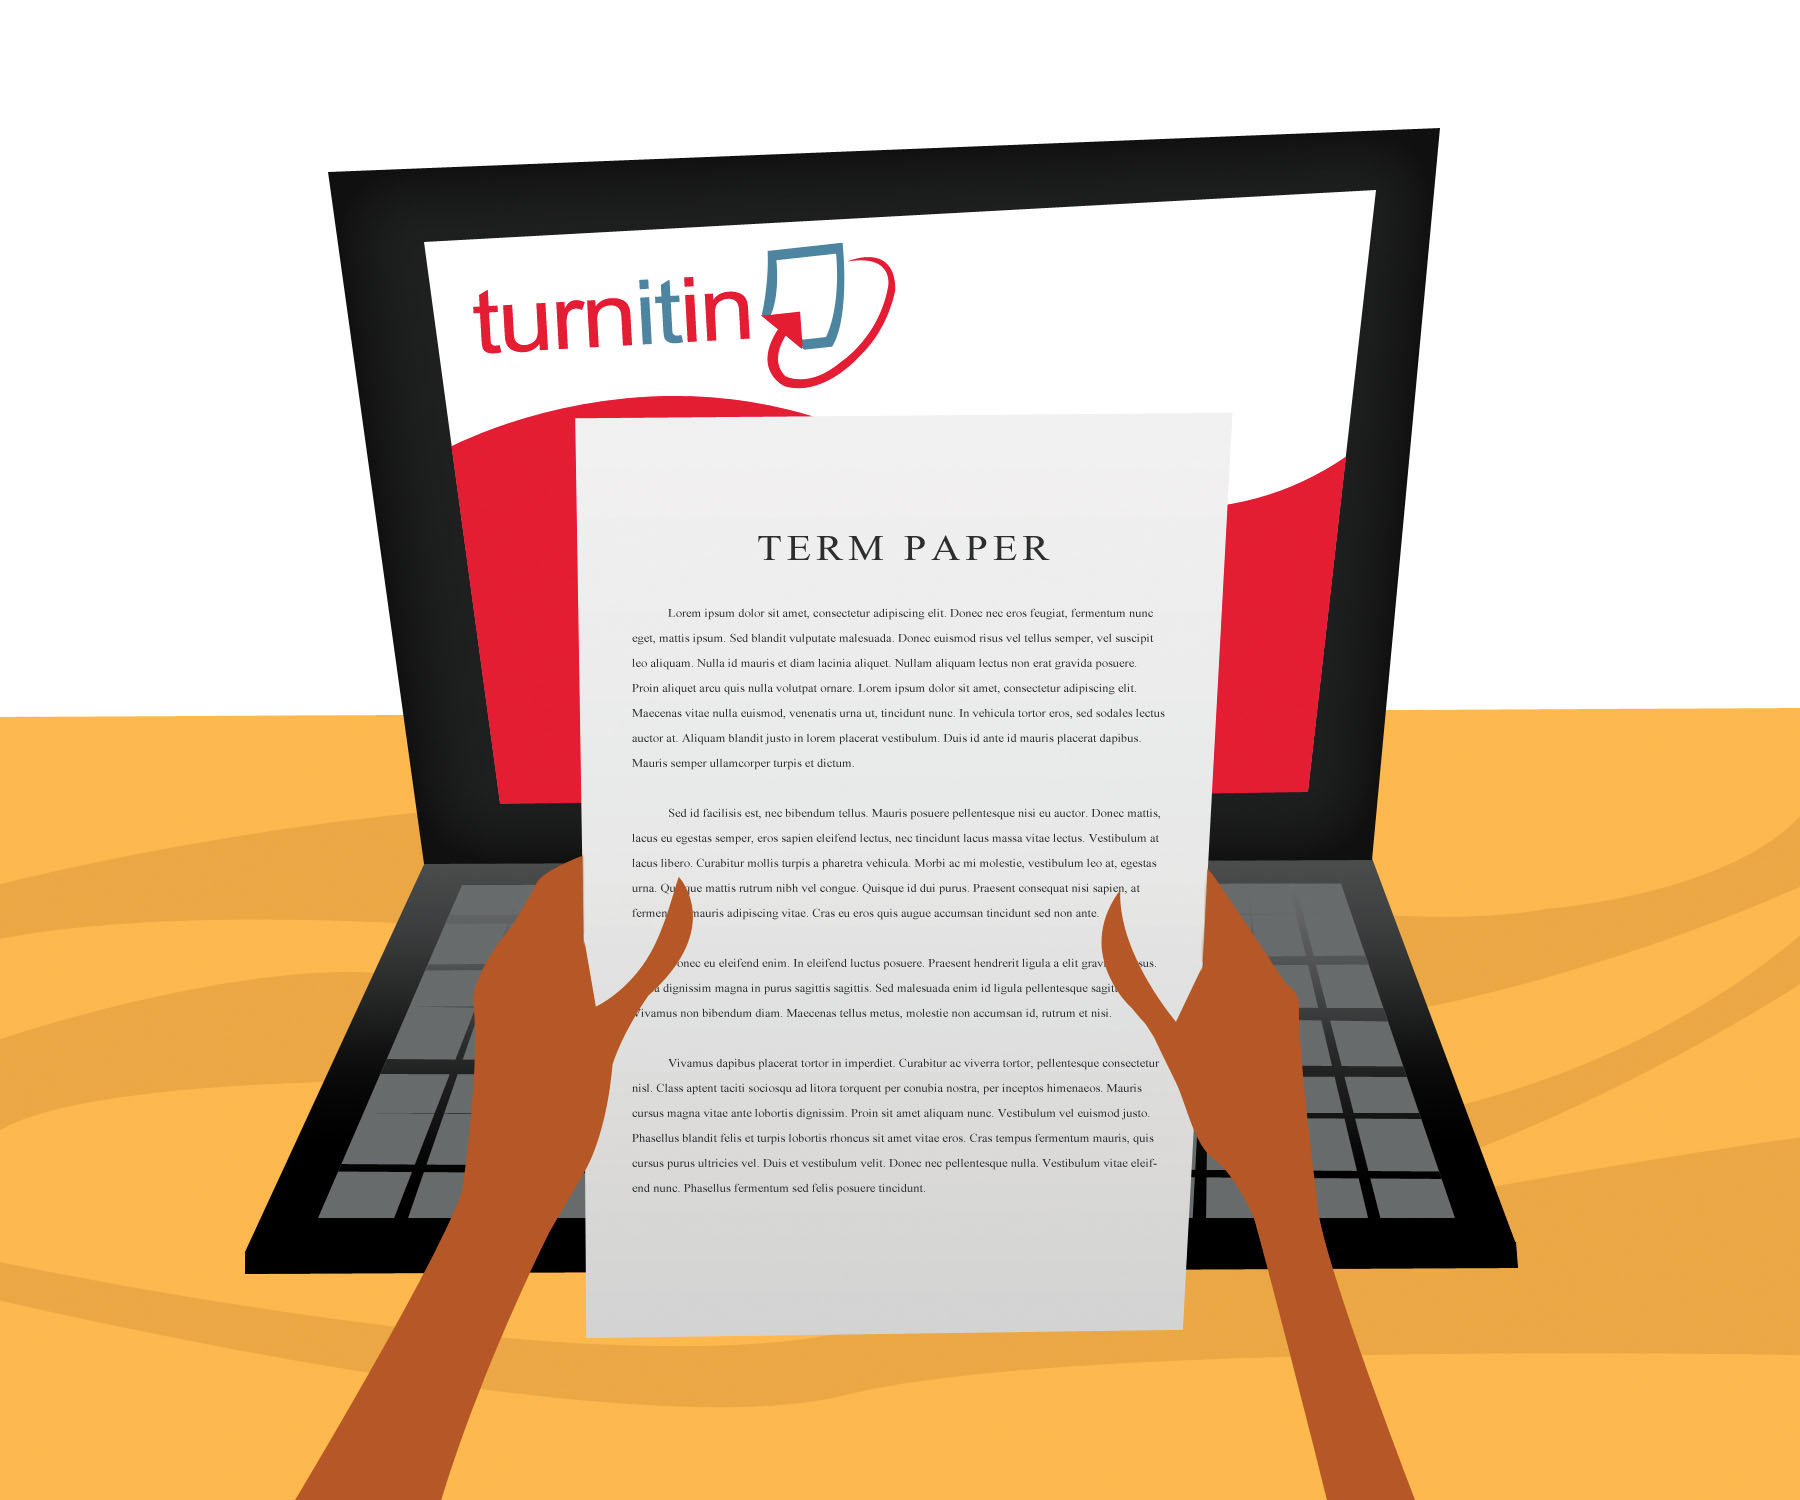 turnitin for plagiarism detection